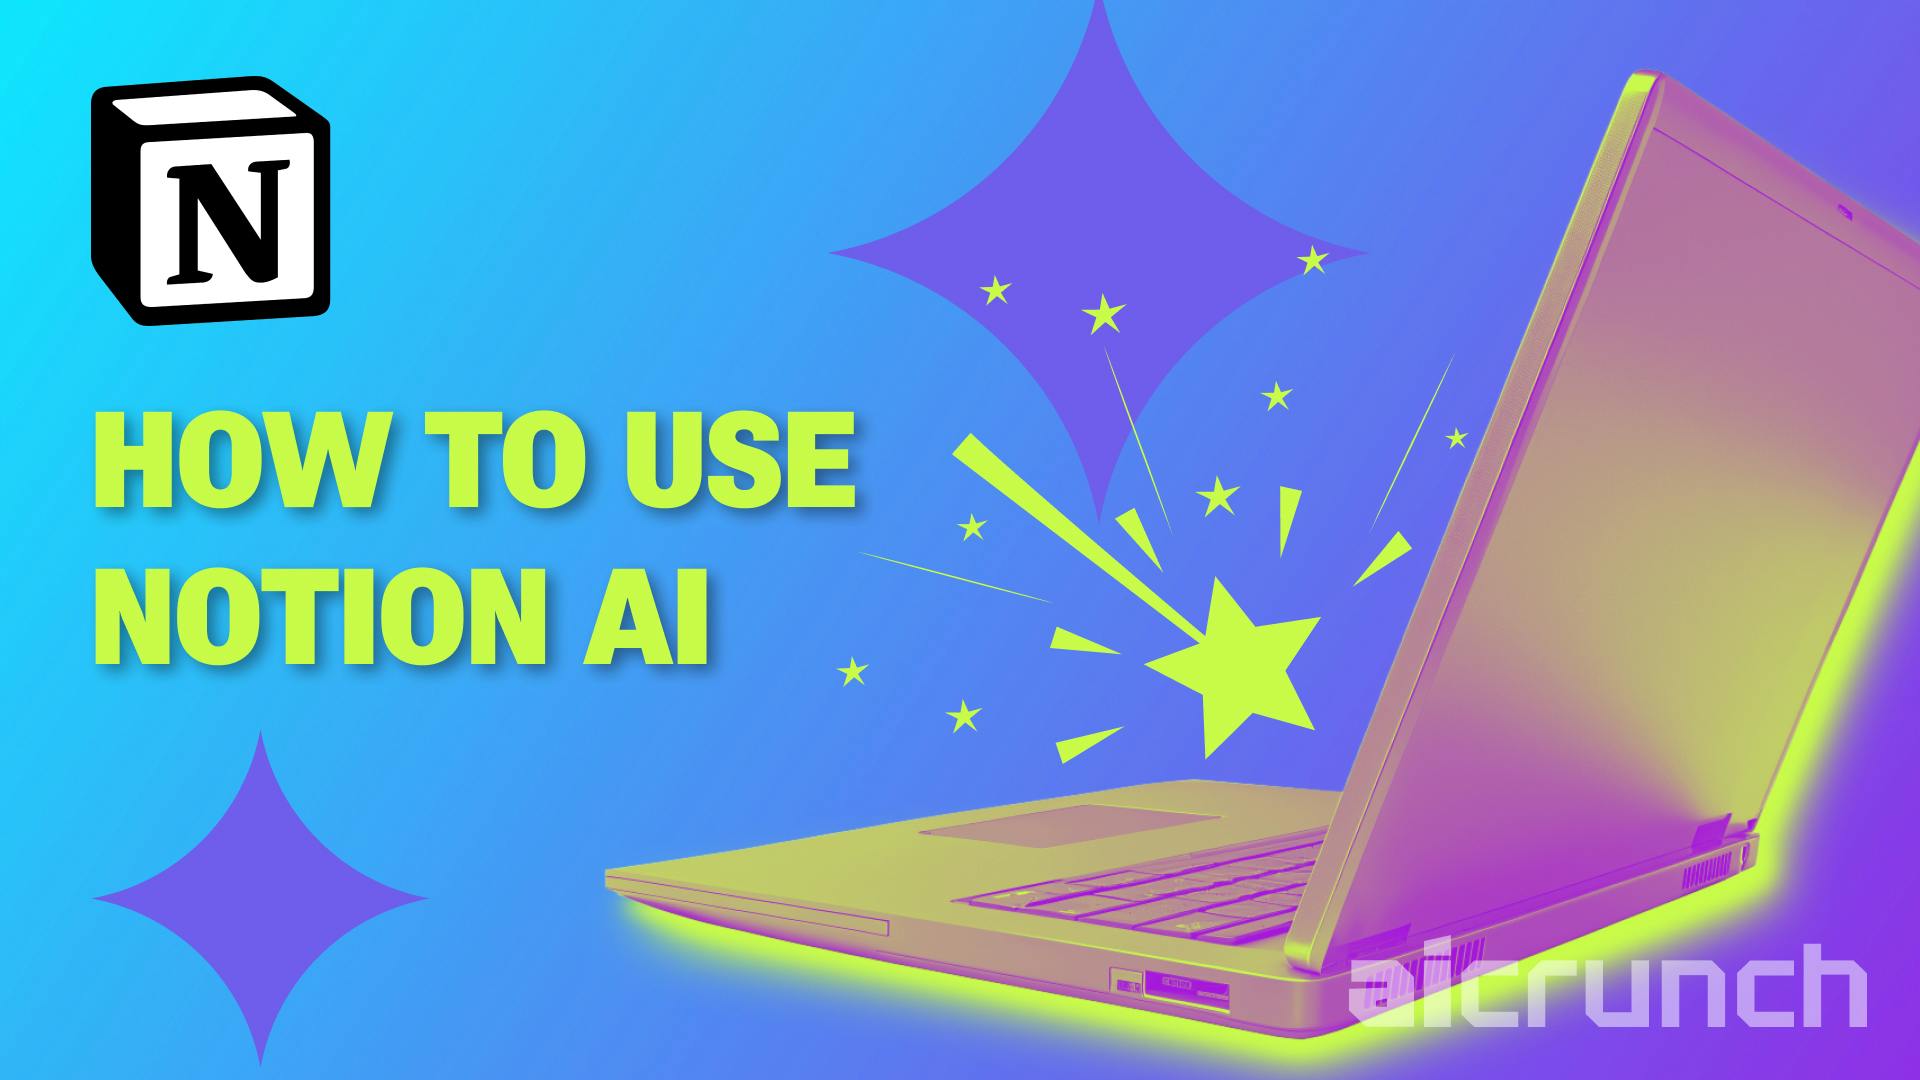 Guide to Notion AI: How to Use Notion AI and Become More Productive